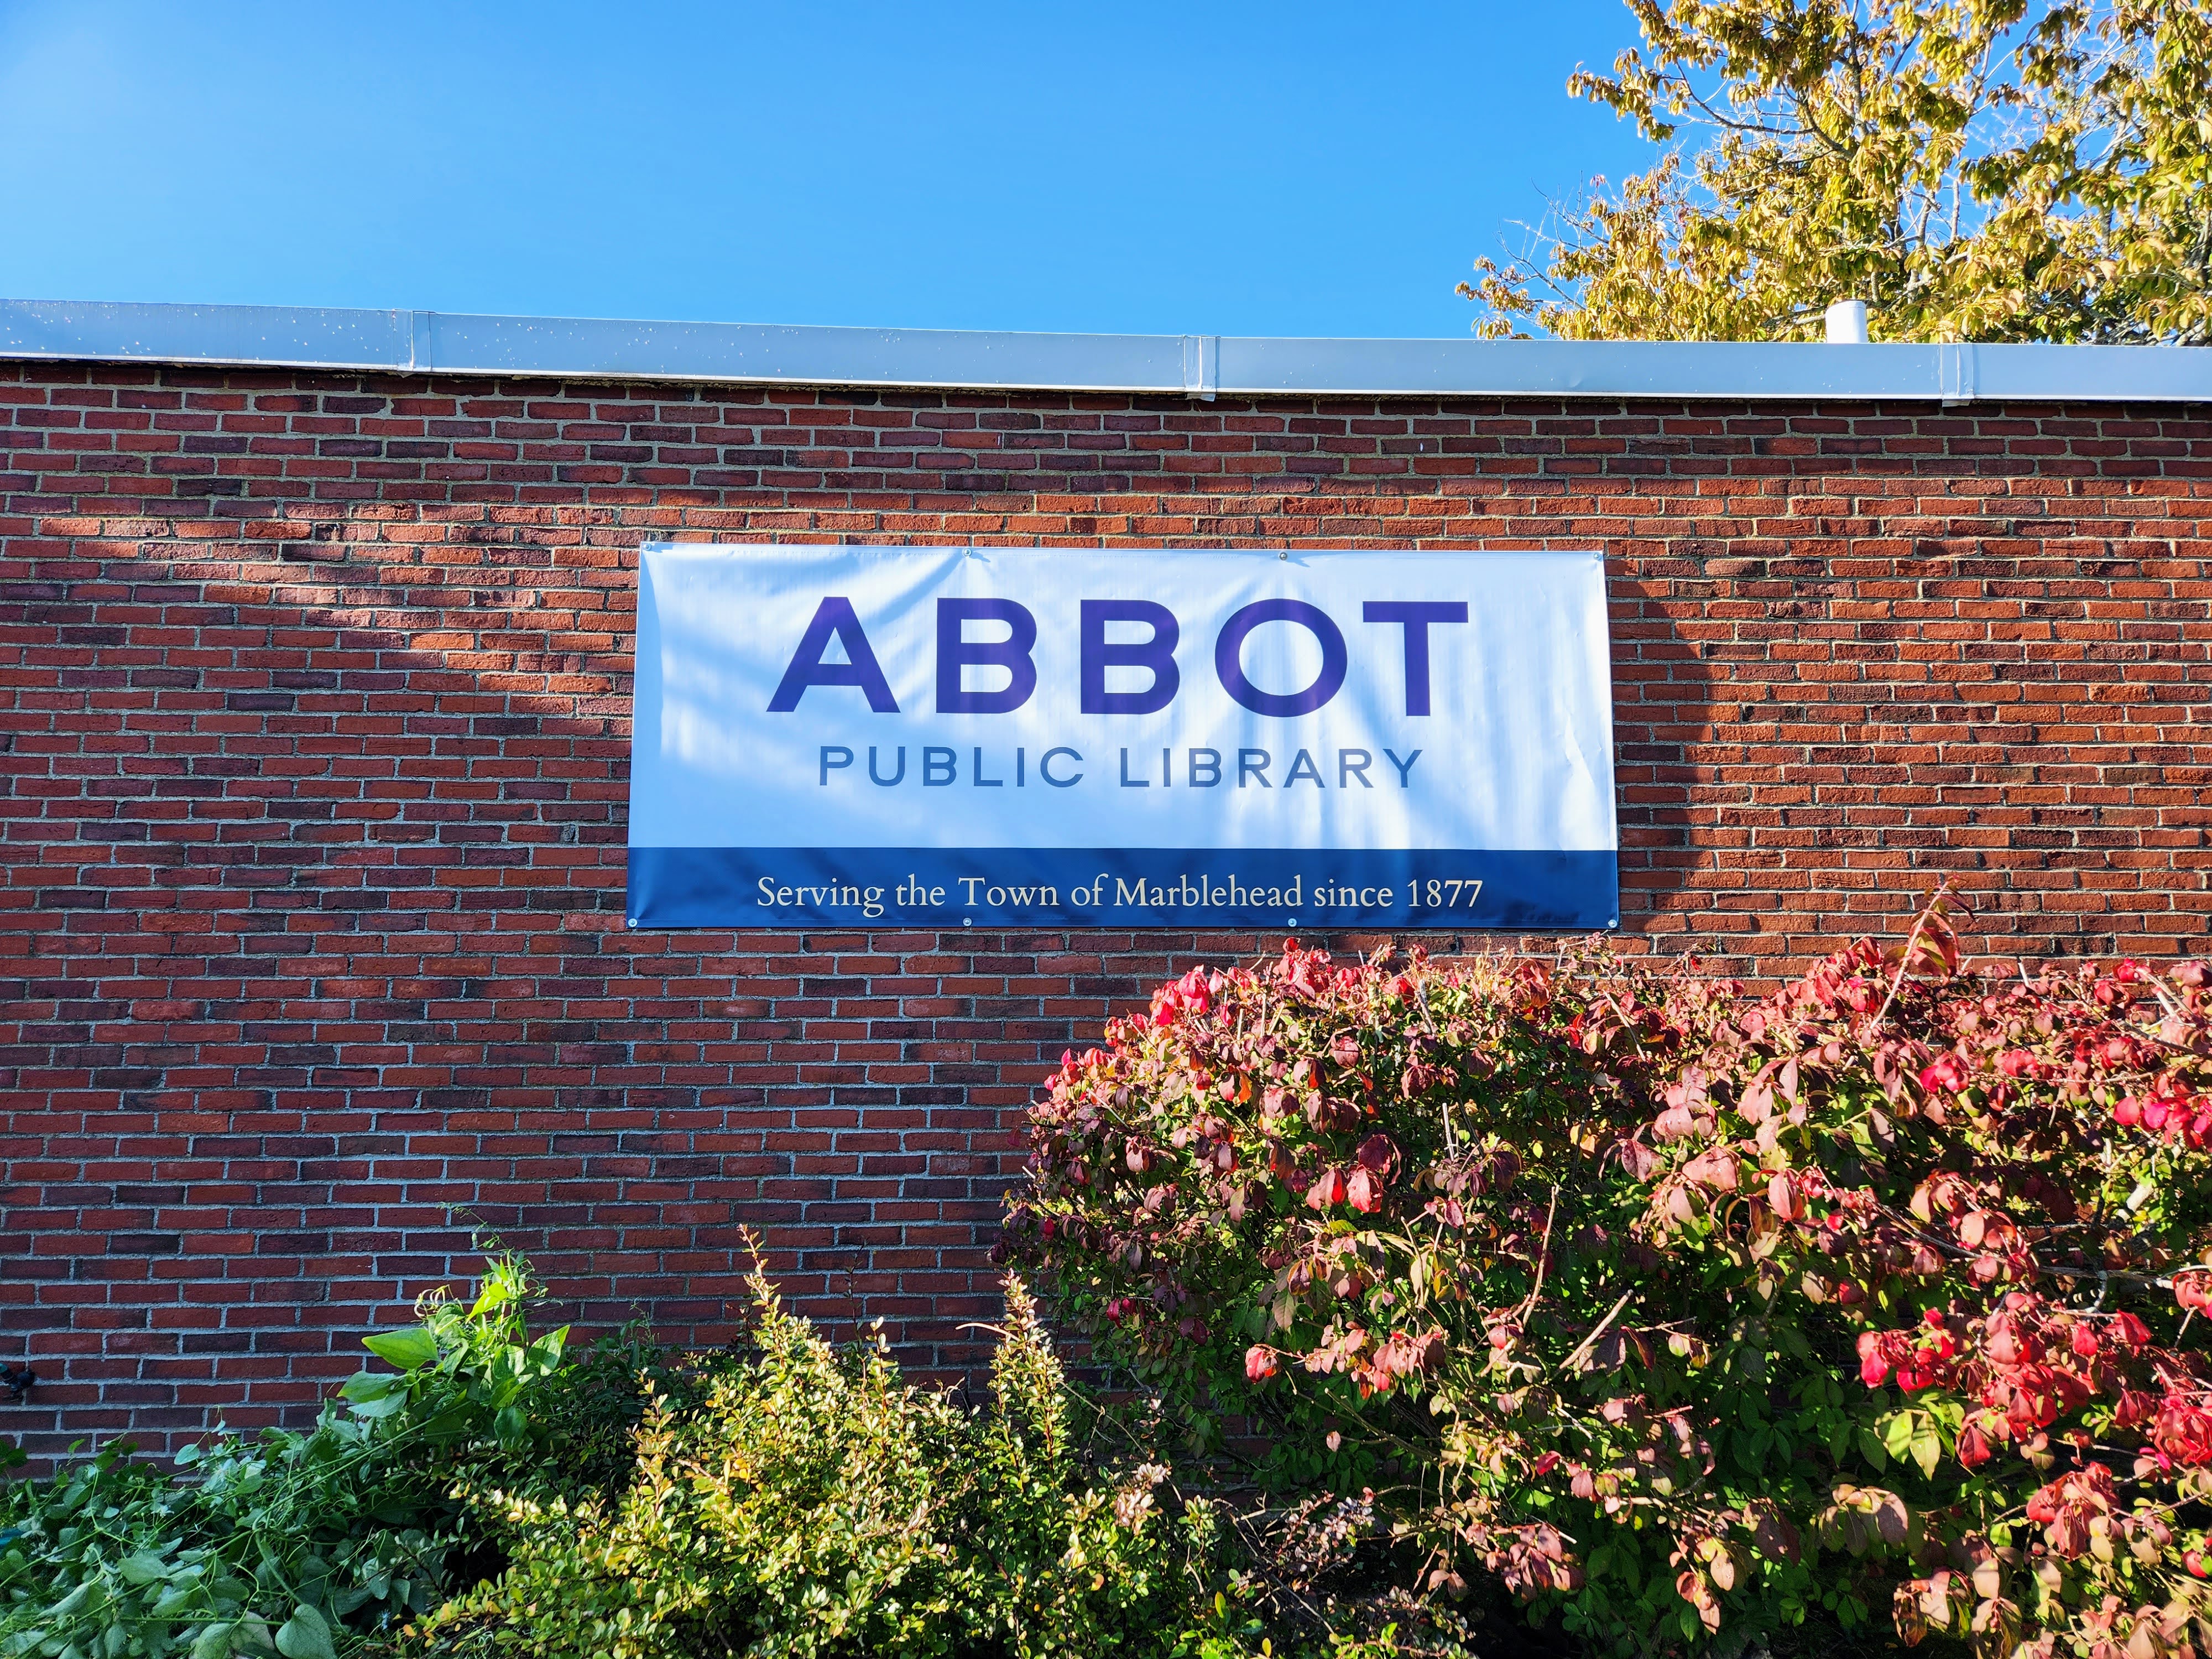 Abbot Public Library